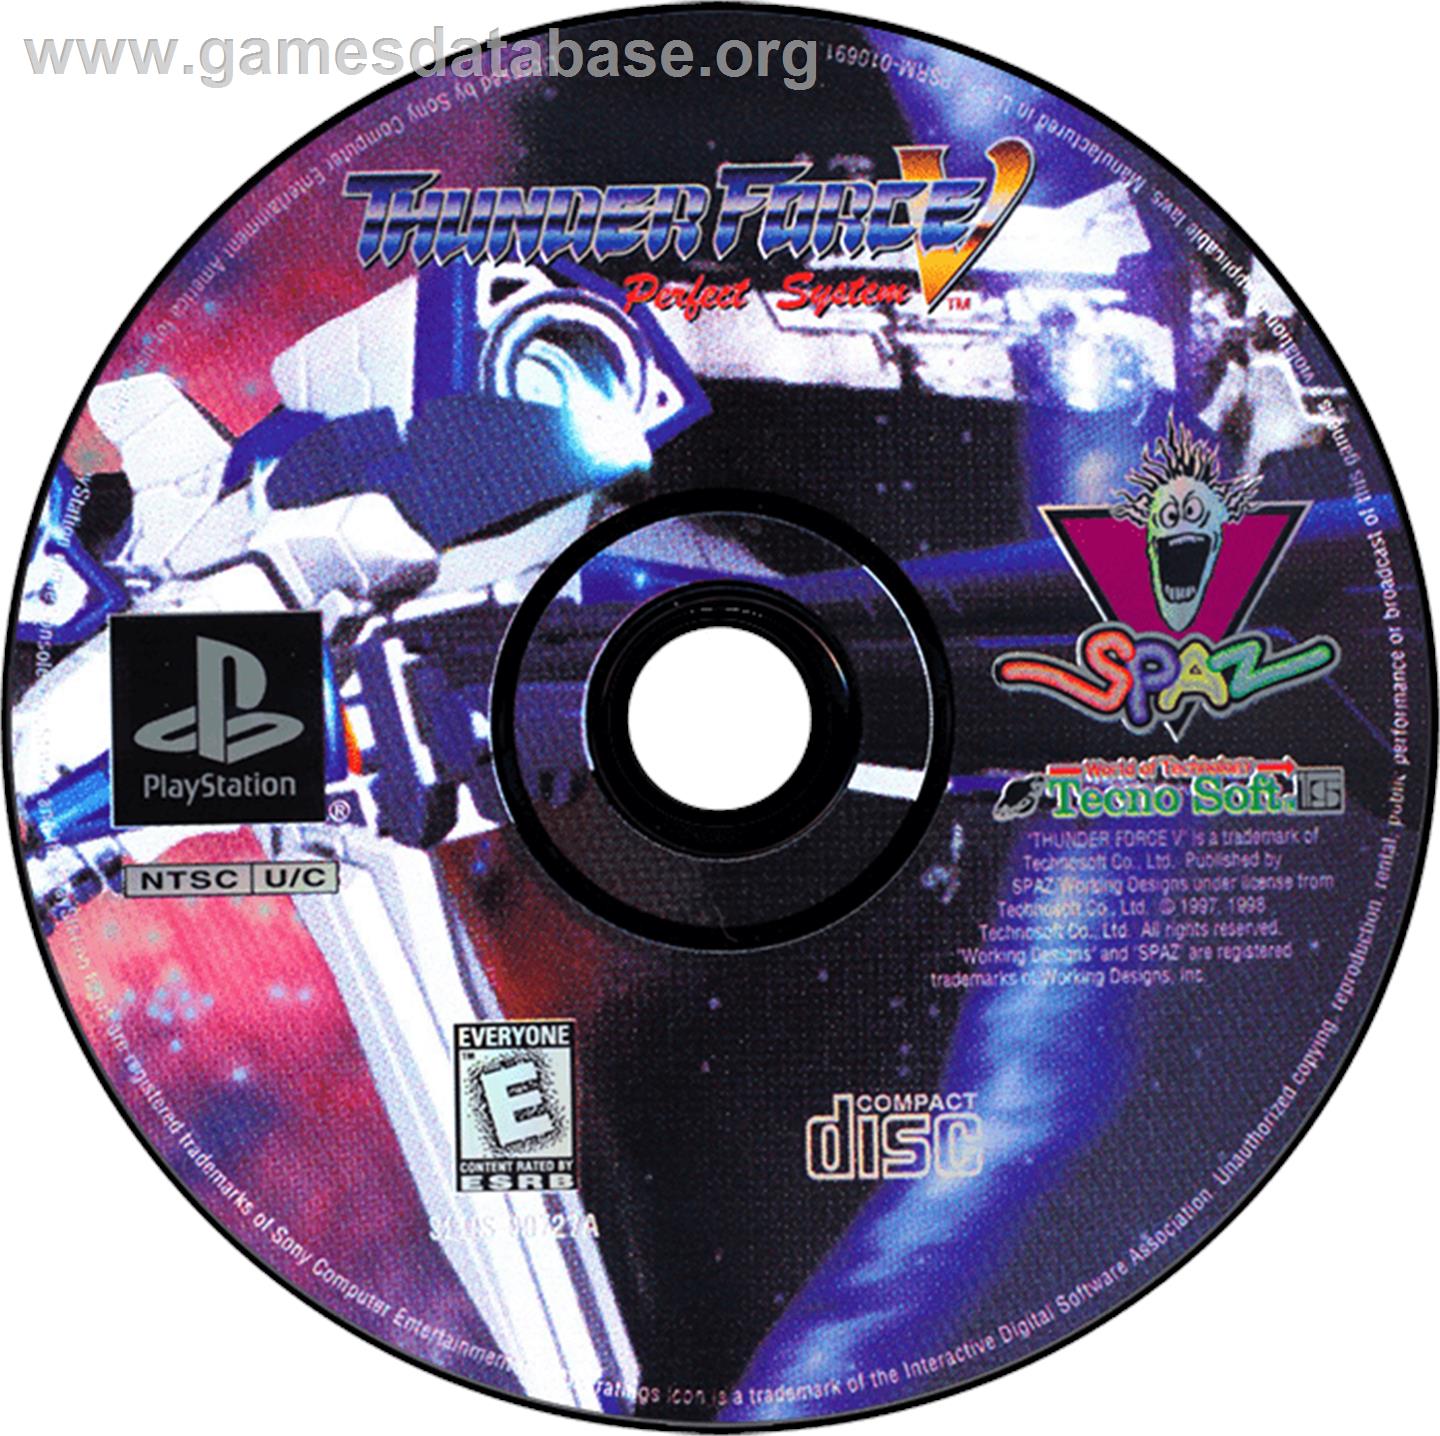 Thunder Force V: Perfect System - Sony Playstation - Artwork - Disc